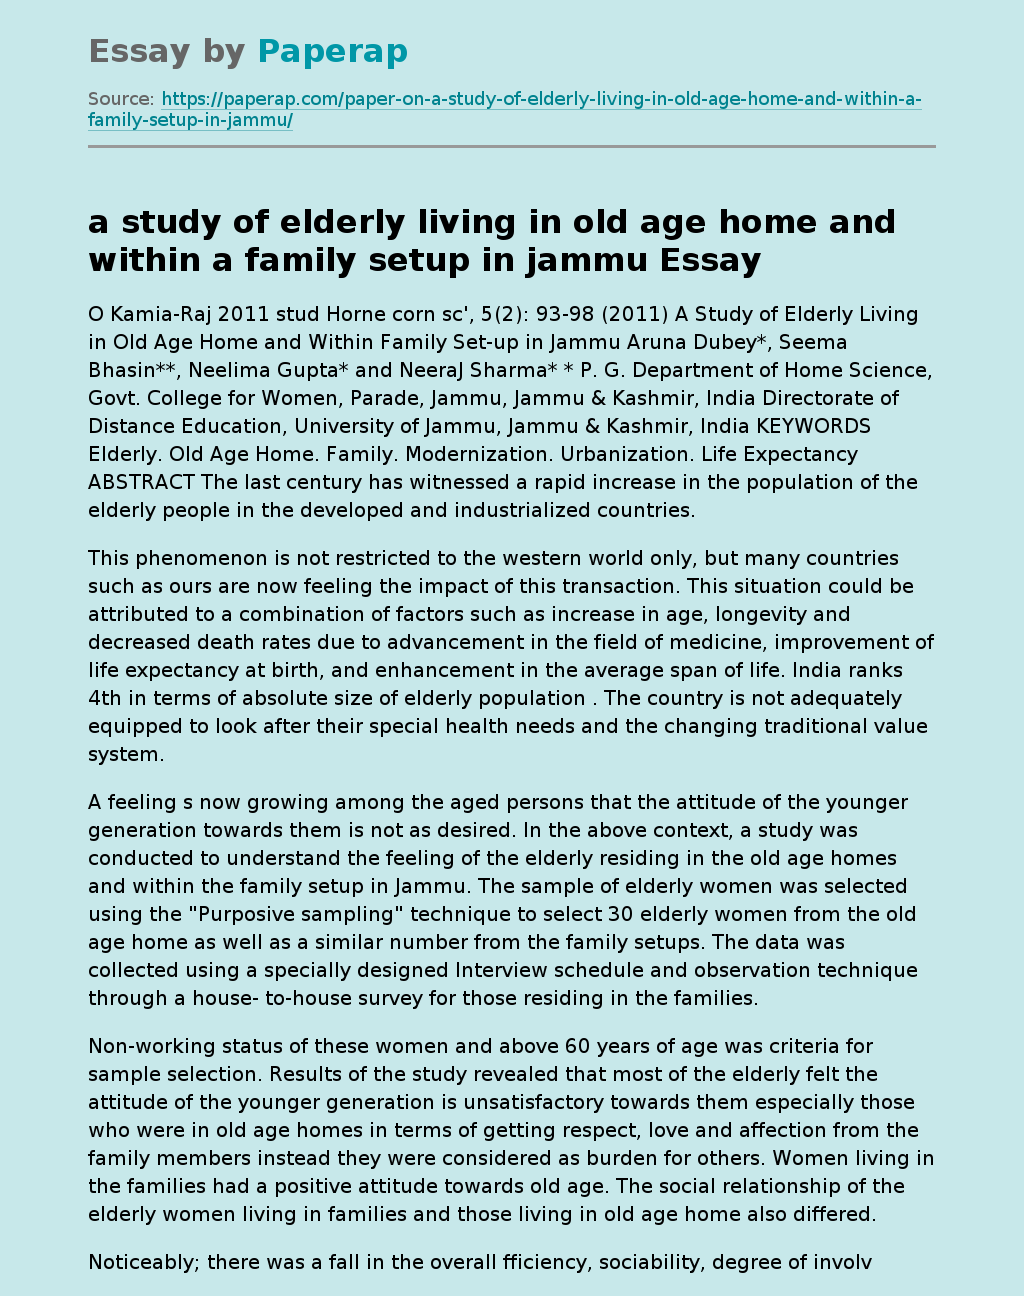 a study of elderly living in old age home and within a family setup in jammu